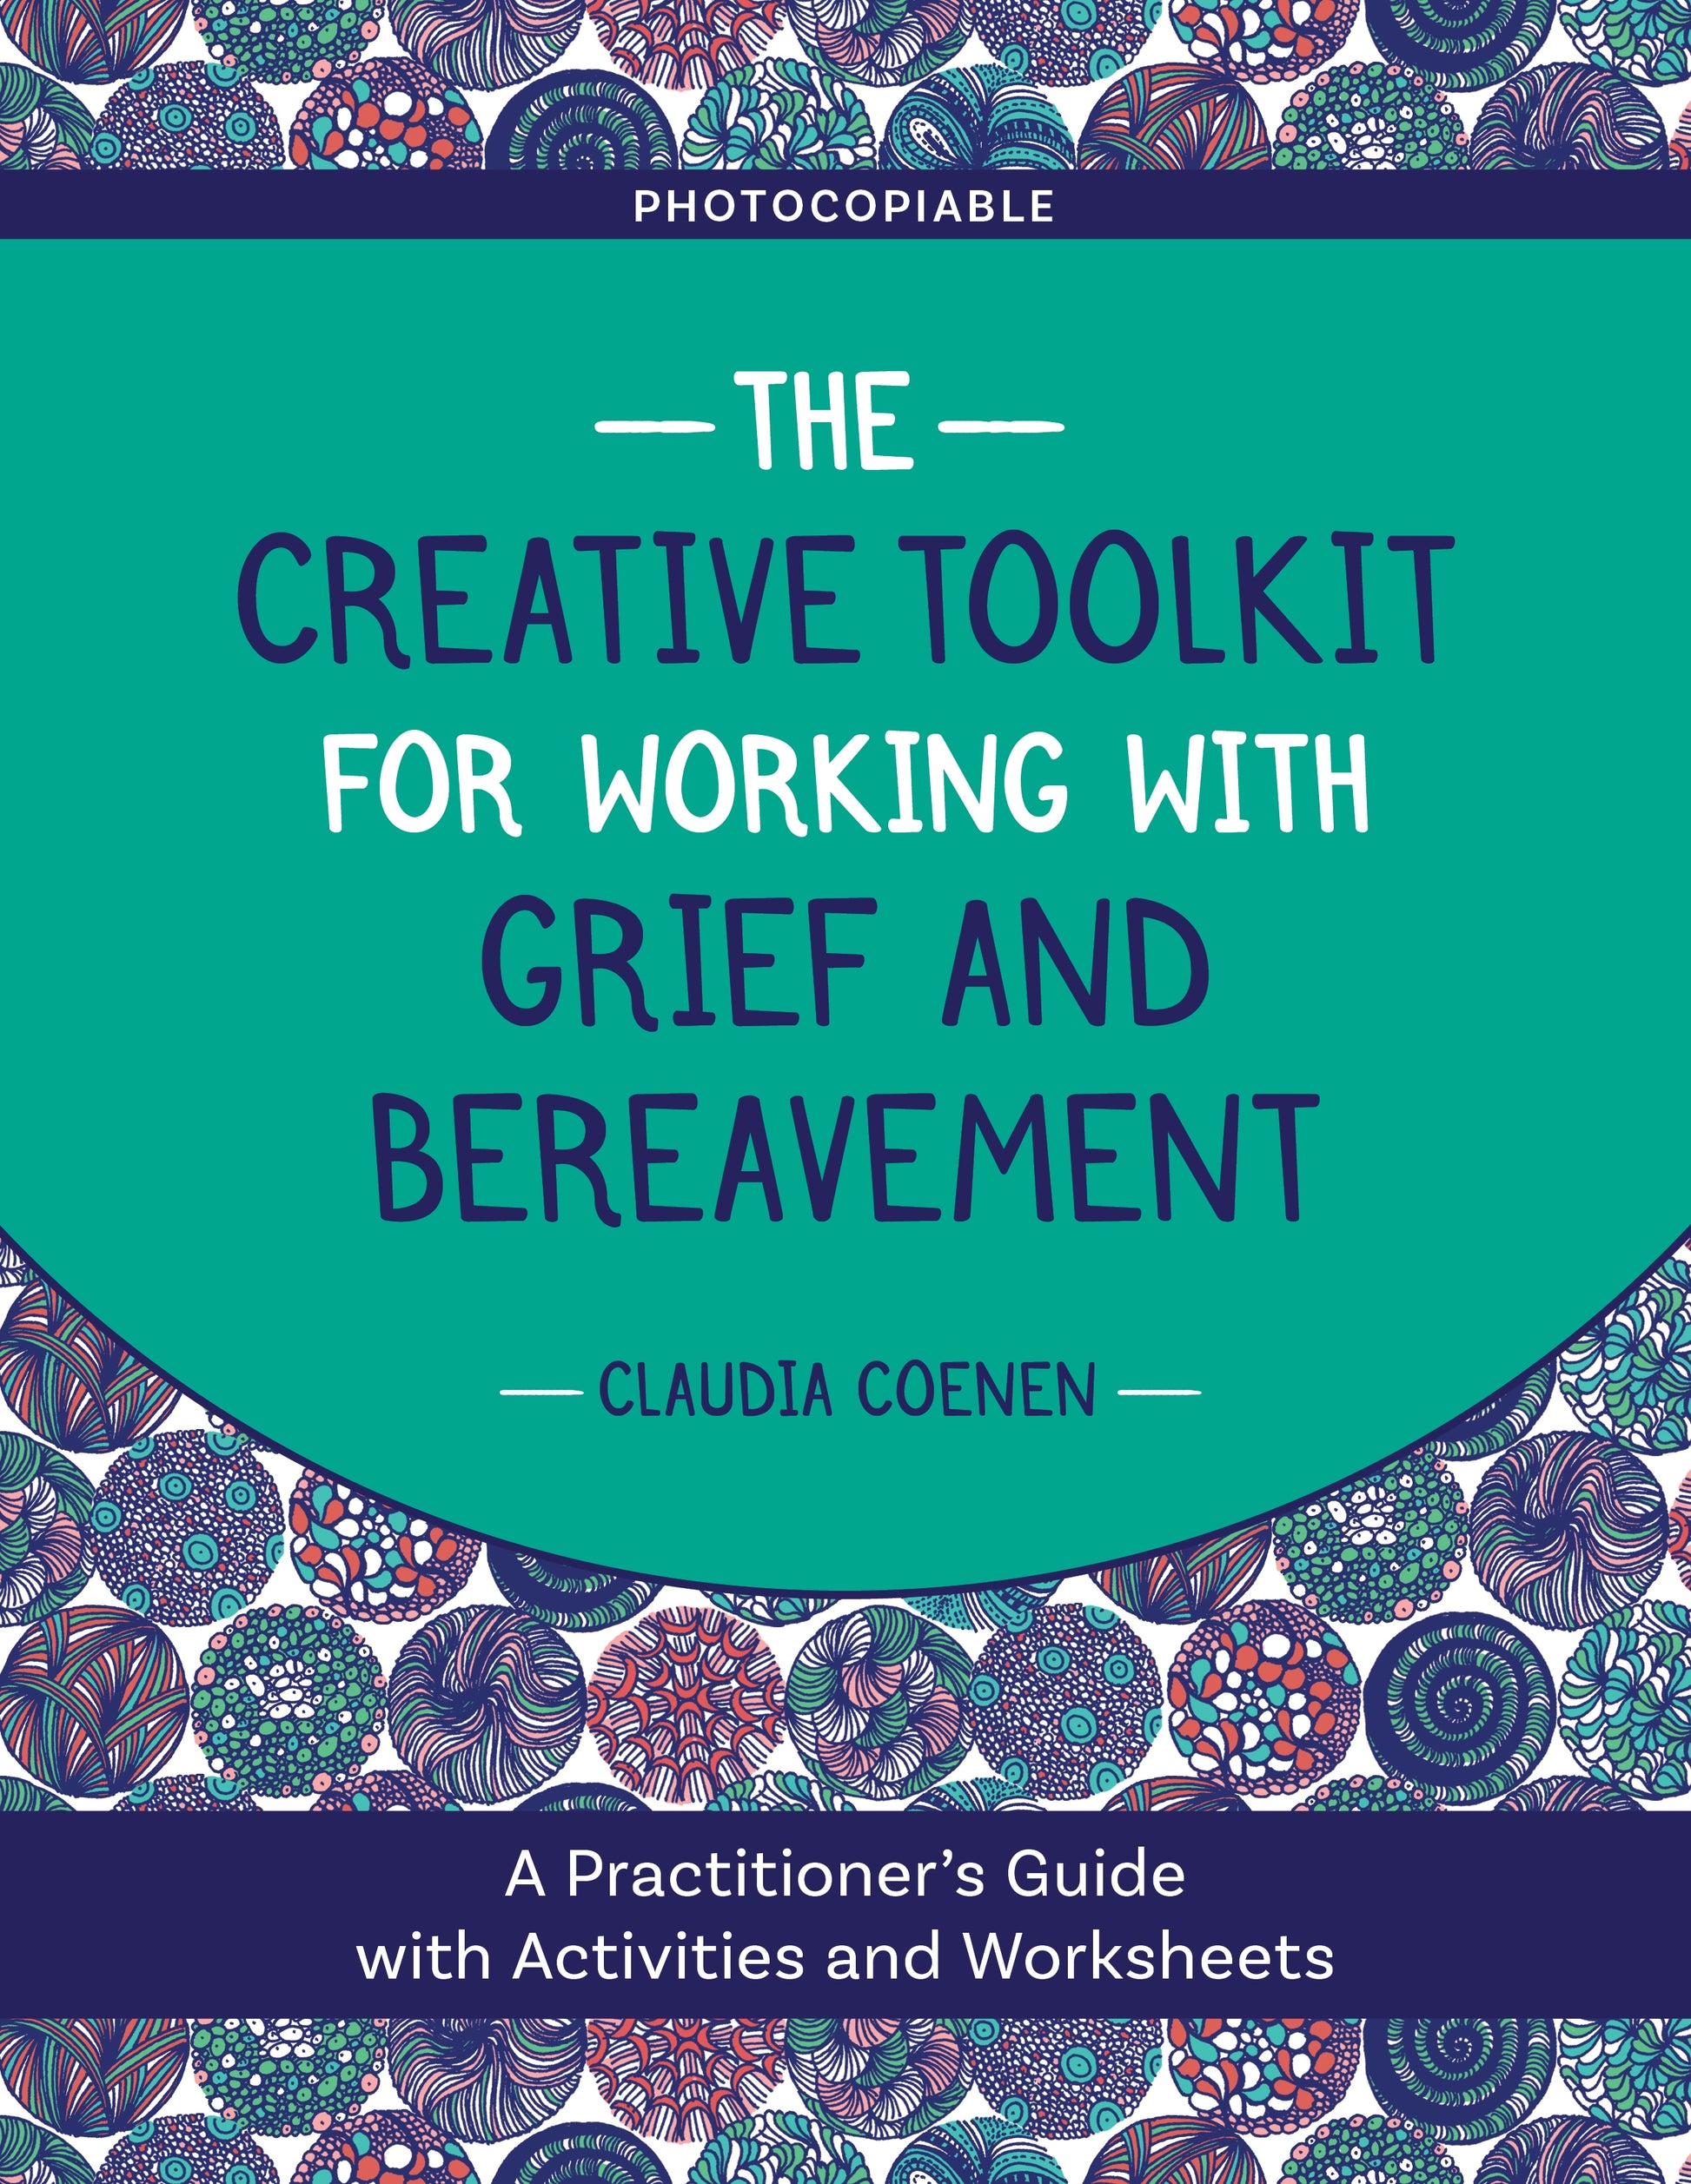 The Creative Toolkit for Working with Grief and Bereavement by Claudia Coenen, Masha Pimas